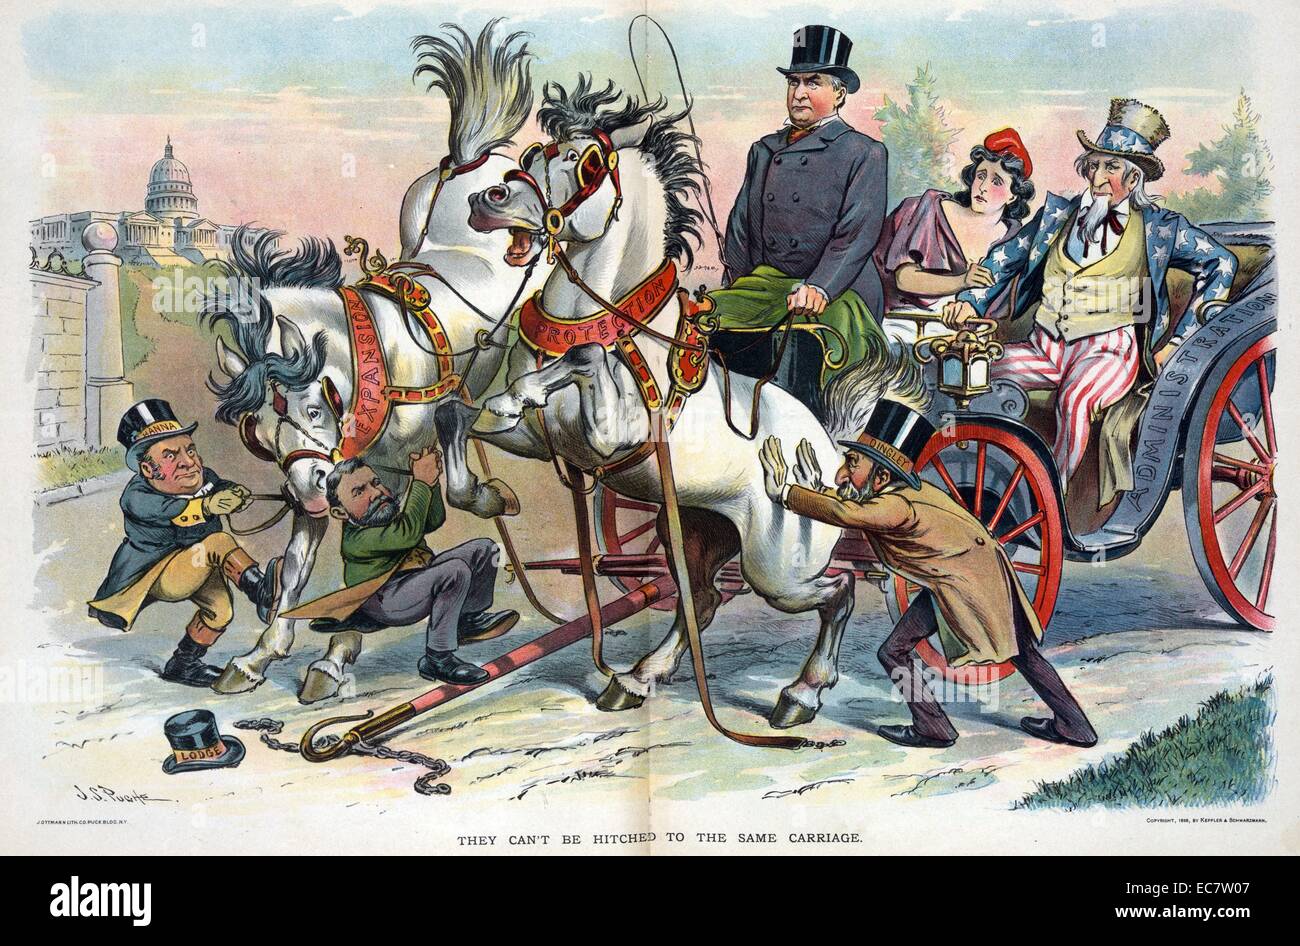 They can't be hitched to the same carriage' President William McKinley (1843-1901) at the reins of a carriage labelled 'Administration' carrying Uncle Sam and Columbia; three men labelled 'Hanna, Lodge, [and] Dingley' are having difficulty harnessing two unruly horses labelled 'Expansion' and 'Protection' to the carriage. Stock Photo